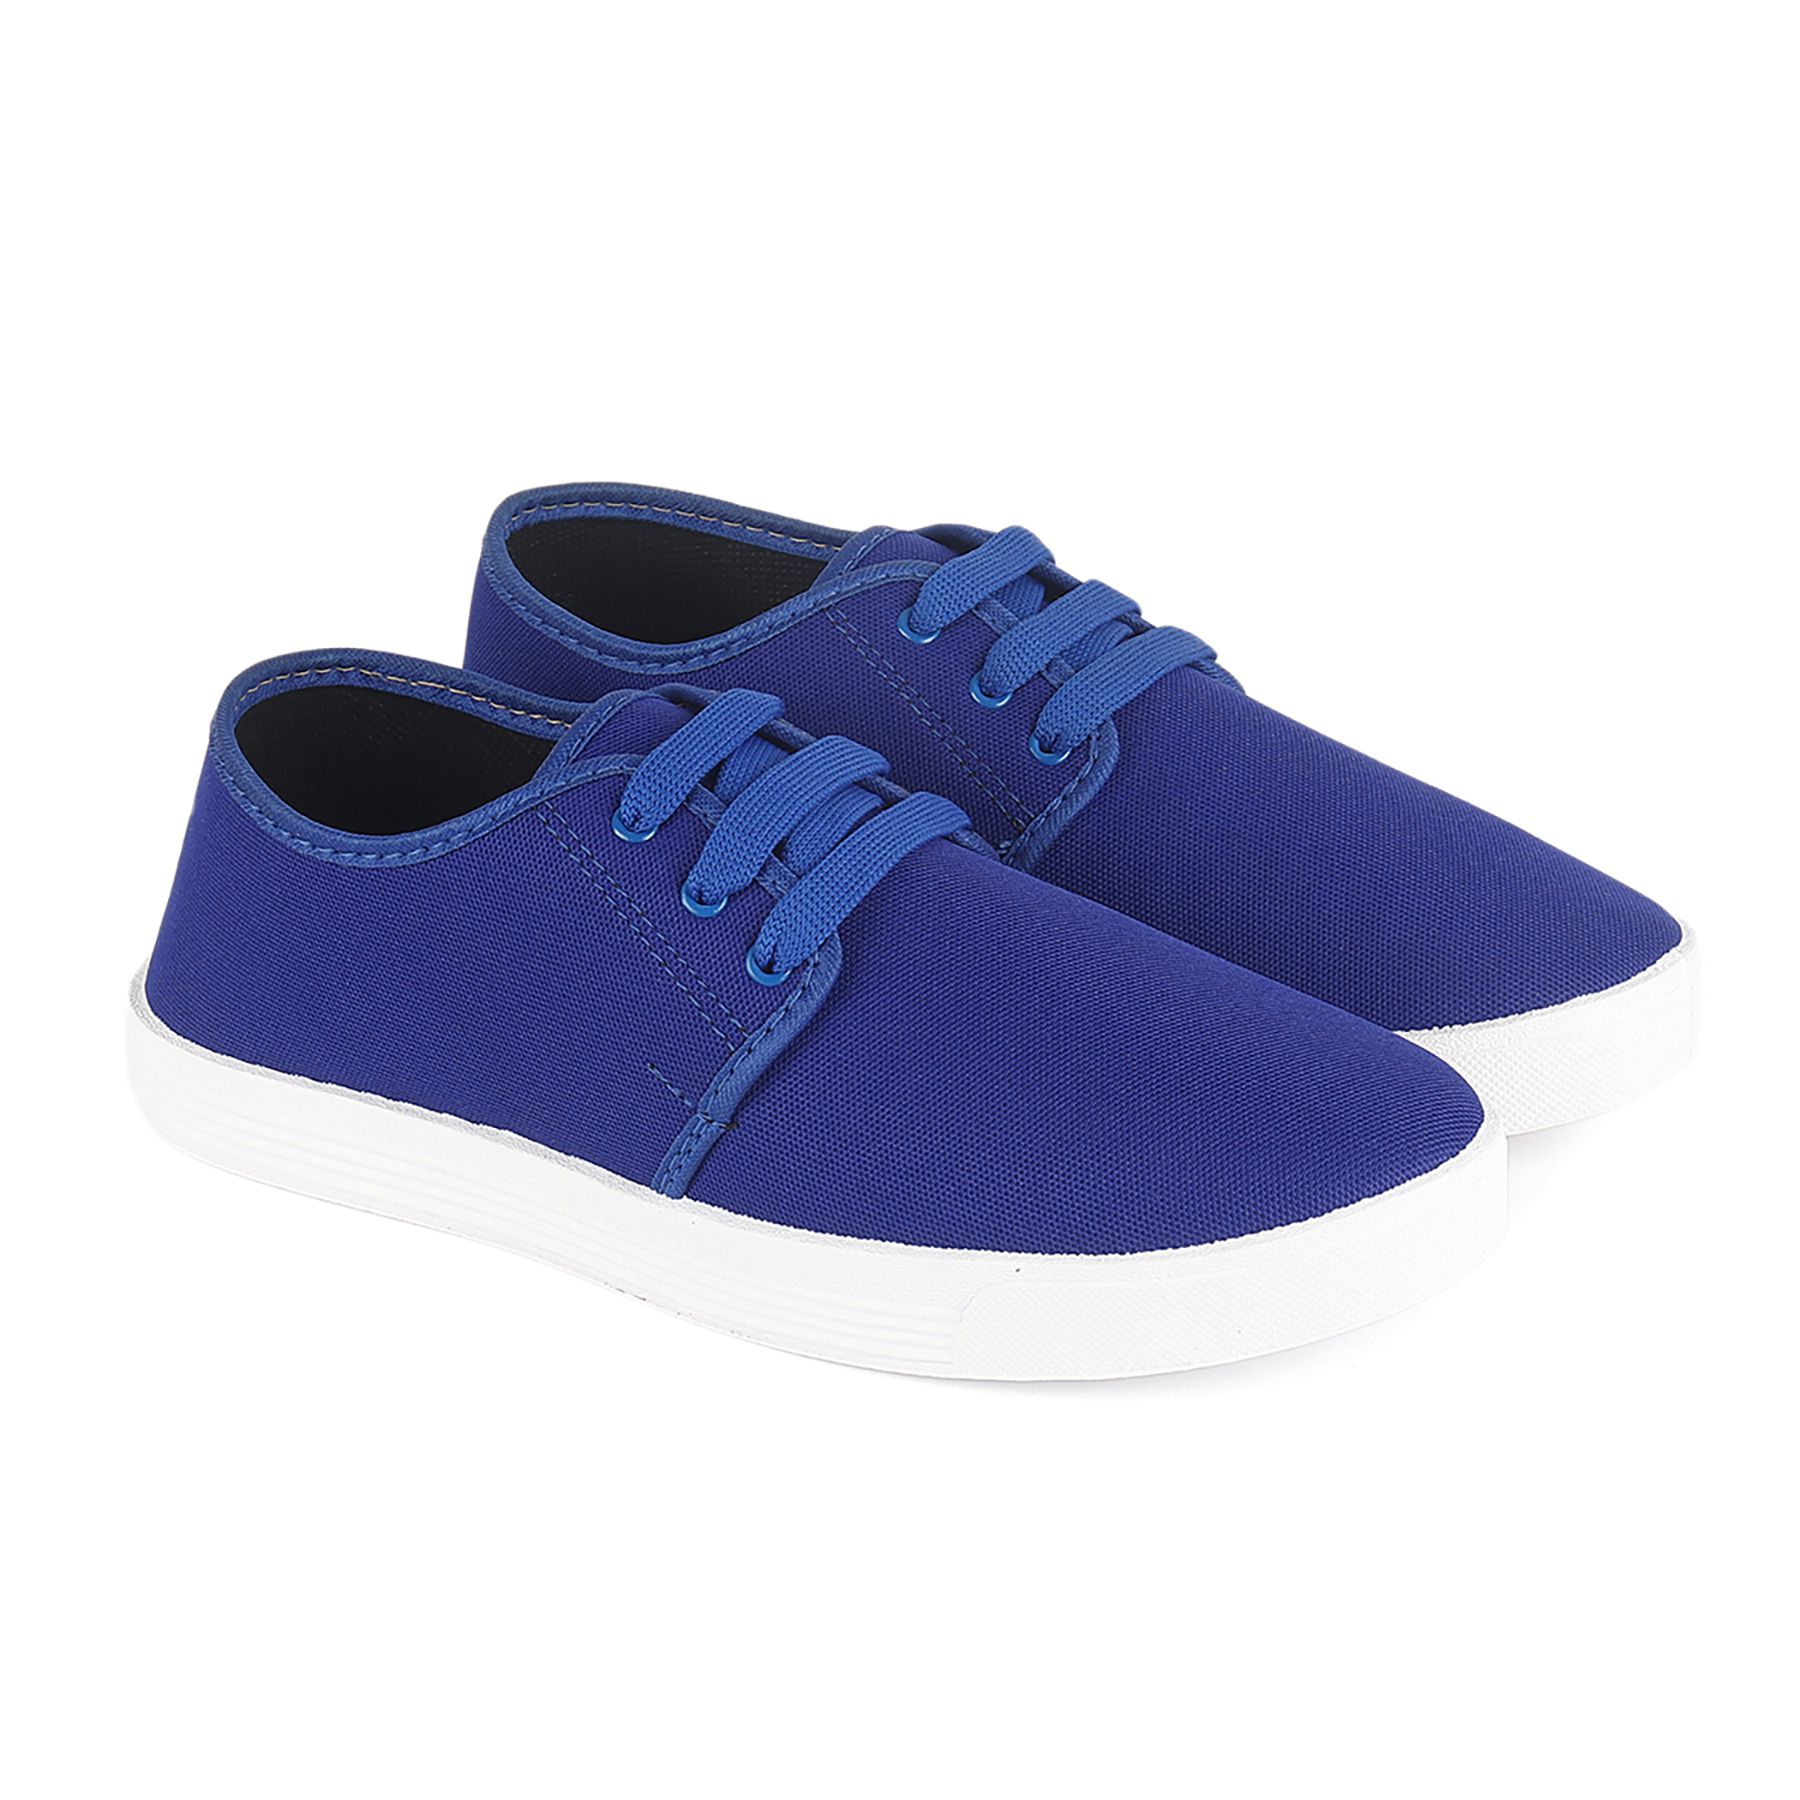     			Bruton Sneakers Casual Shoes for Men Blue Men's Lifestyle